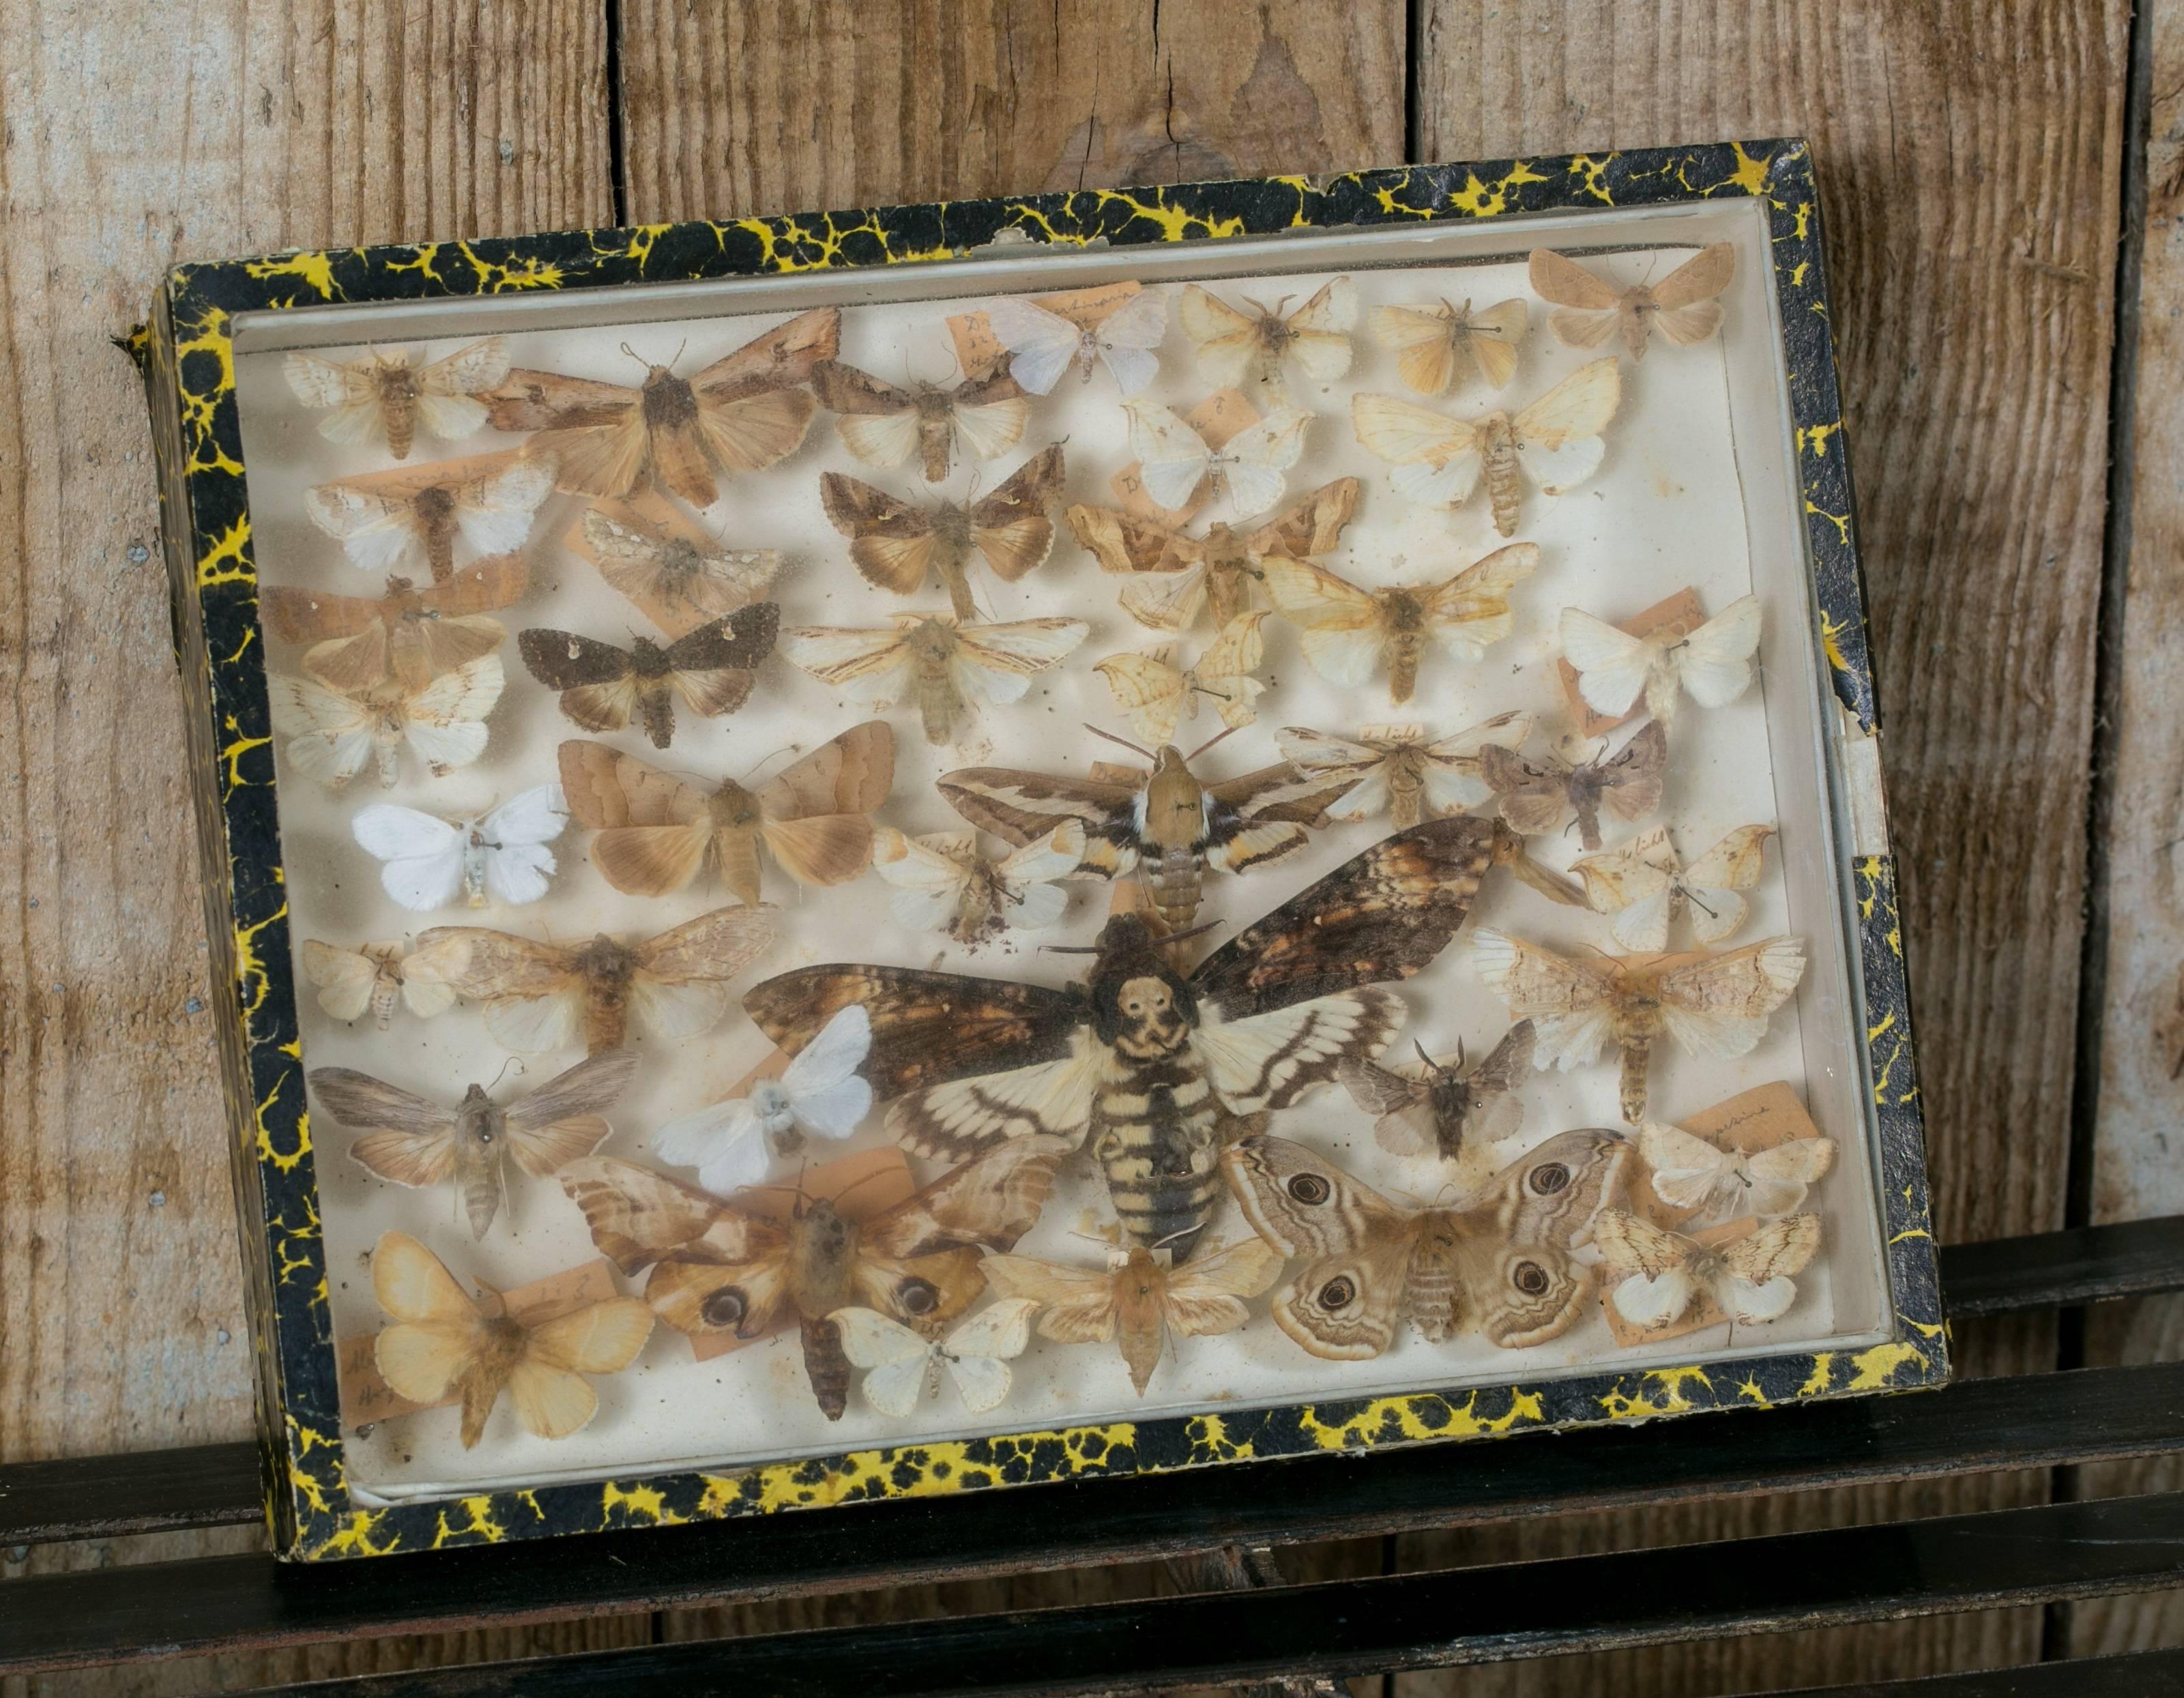 Vintage moth collection from France, circa 1940. Mounted specimens on pins over hand-written paper labels. Glass topped wooden shadow box with yellow and black marbled paper. Box has been sealed shut. Wonderful desk top or bookshelf display.